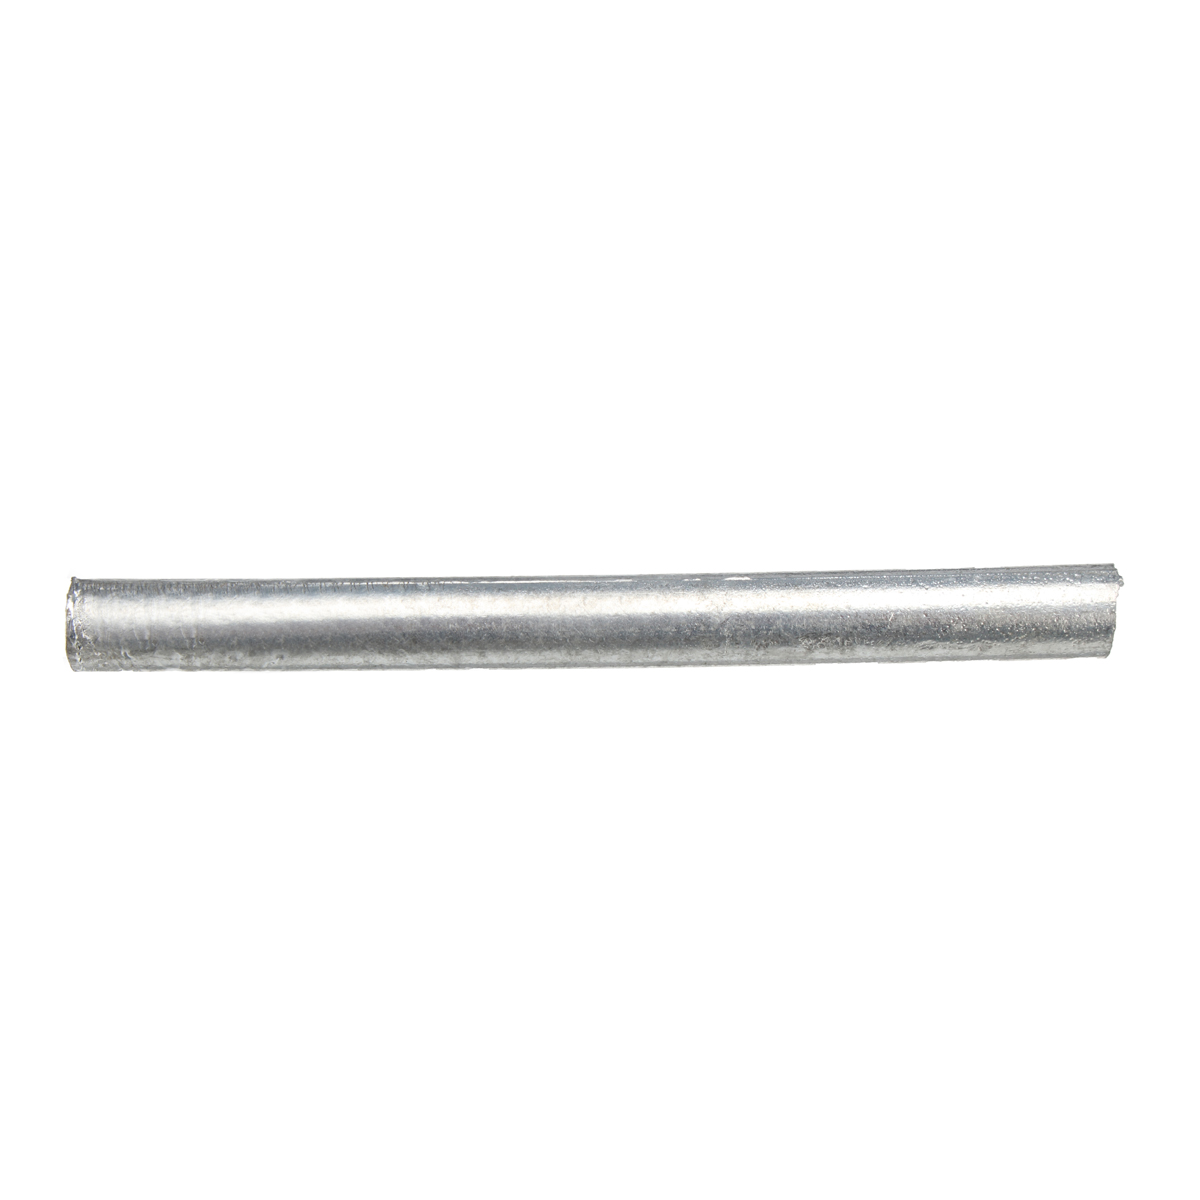 04-inch-x-4-inch-High-Purity-Zn-9995-Zinc-Metal-Rod-Anode-Electroplating-Solid-Round-Bar-1396373-2